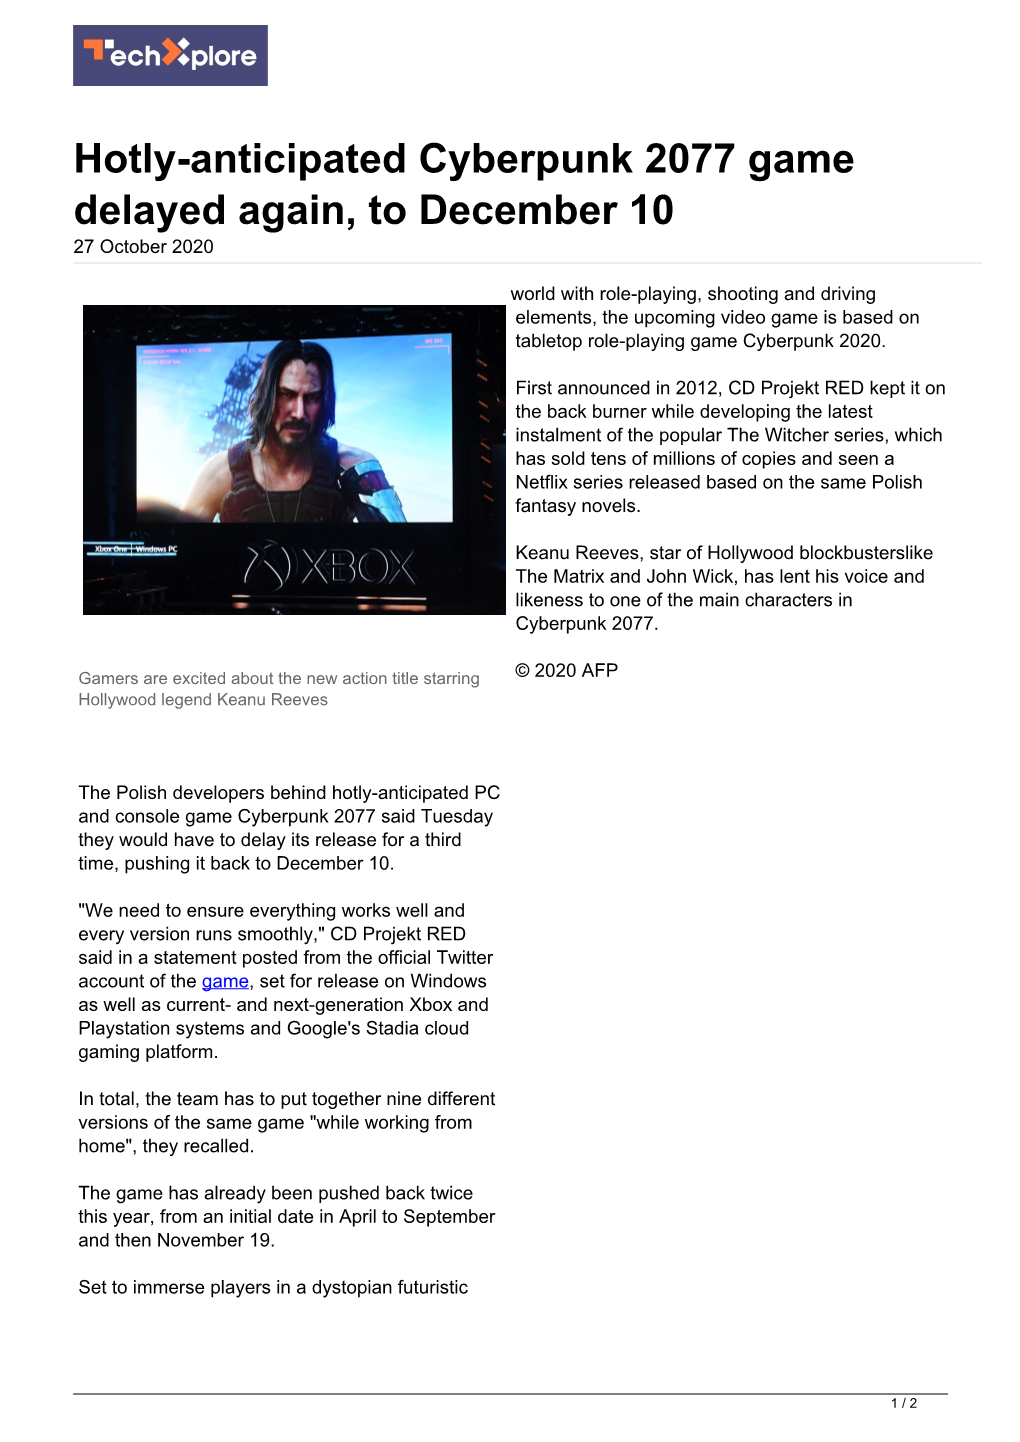 Hotly-Anticipated Cyberpunk 2077 Game Delayed Again, to December 10 27 October 2020